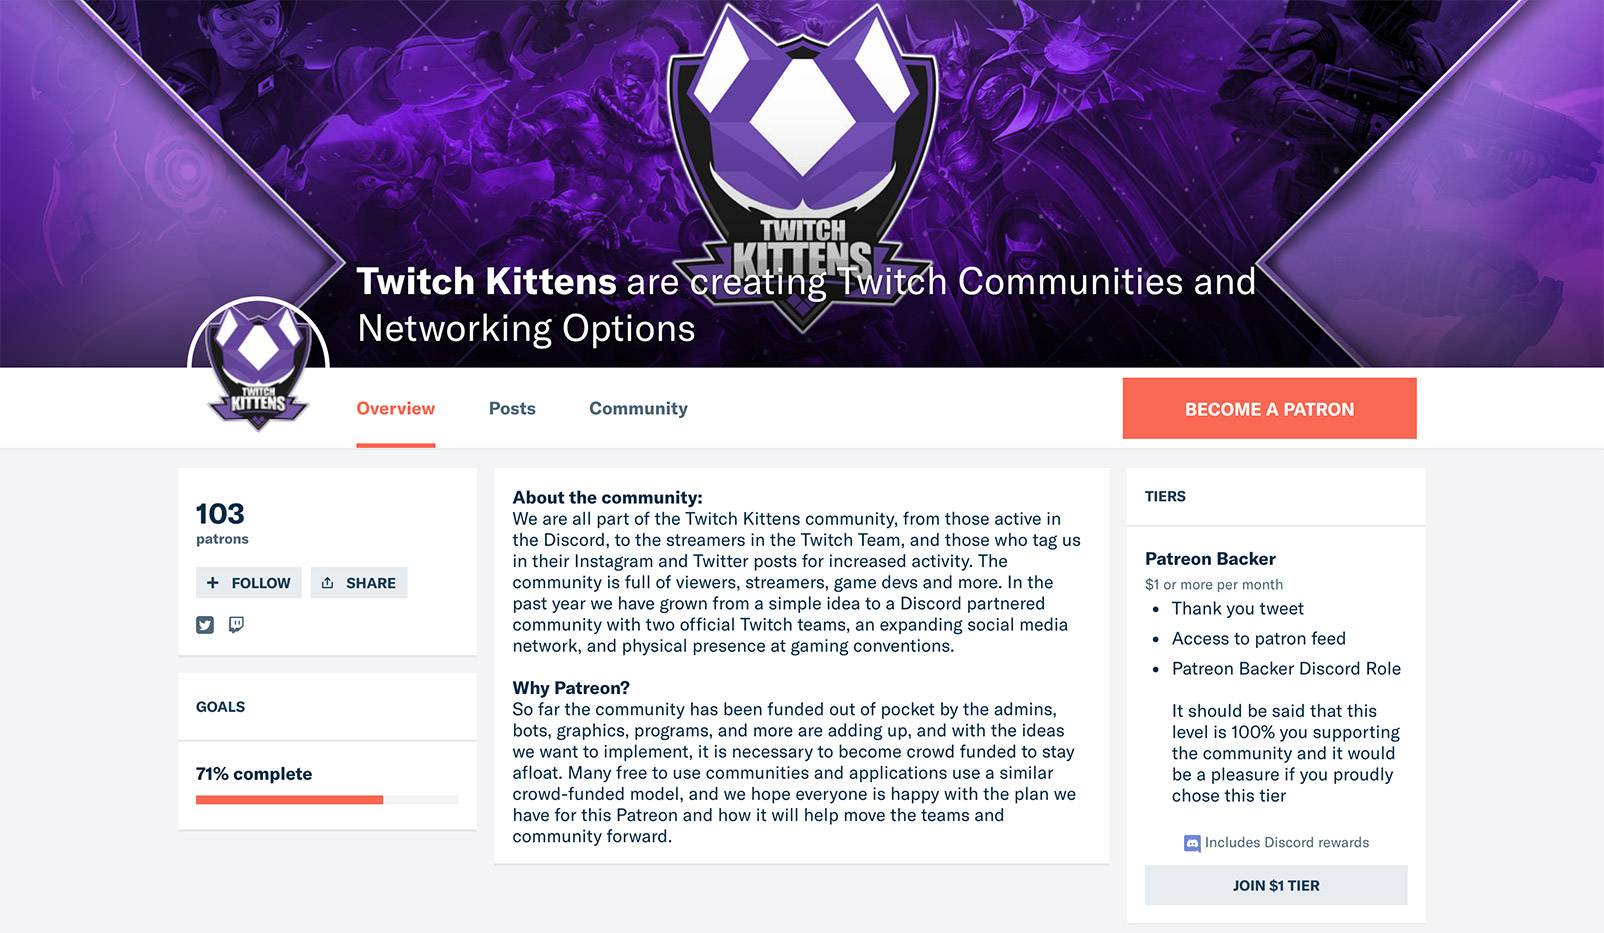 Twitch Kittens' Patreon page